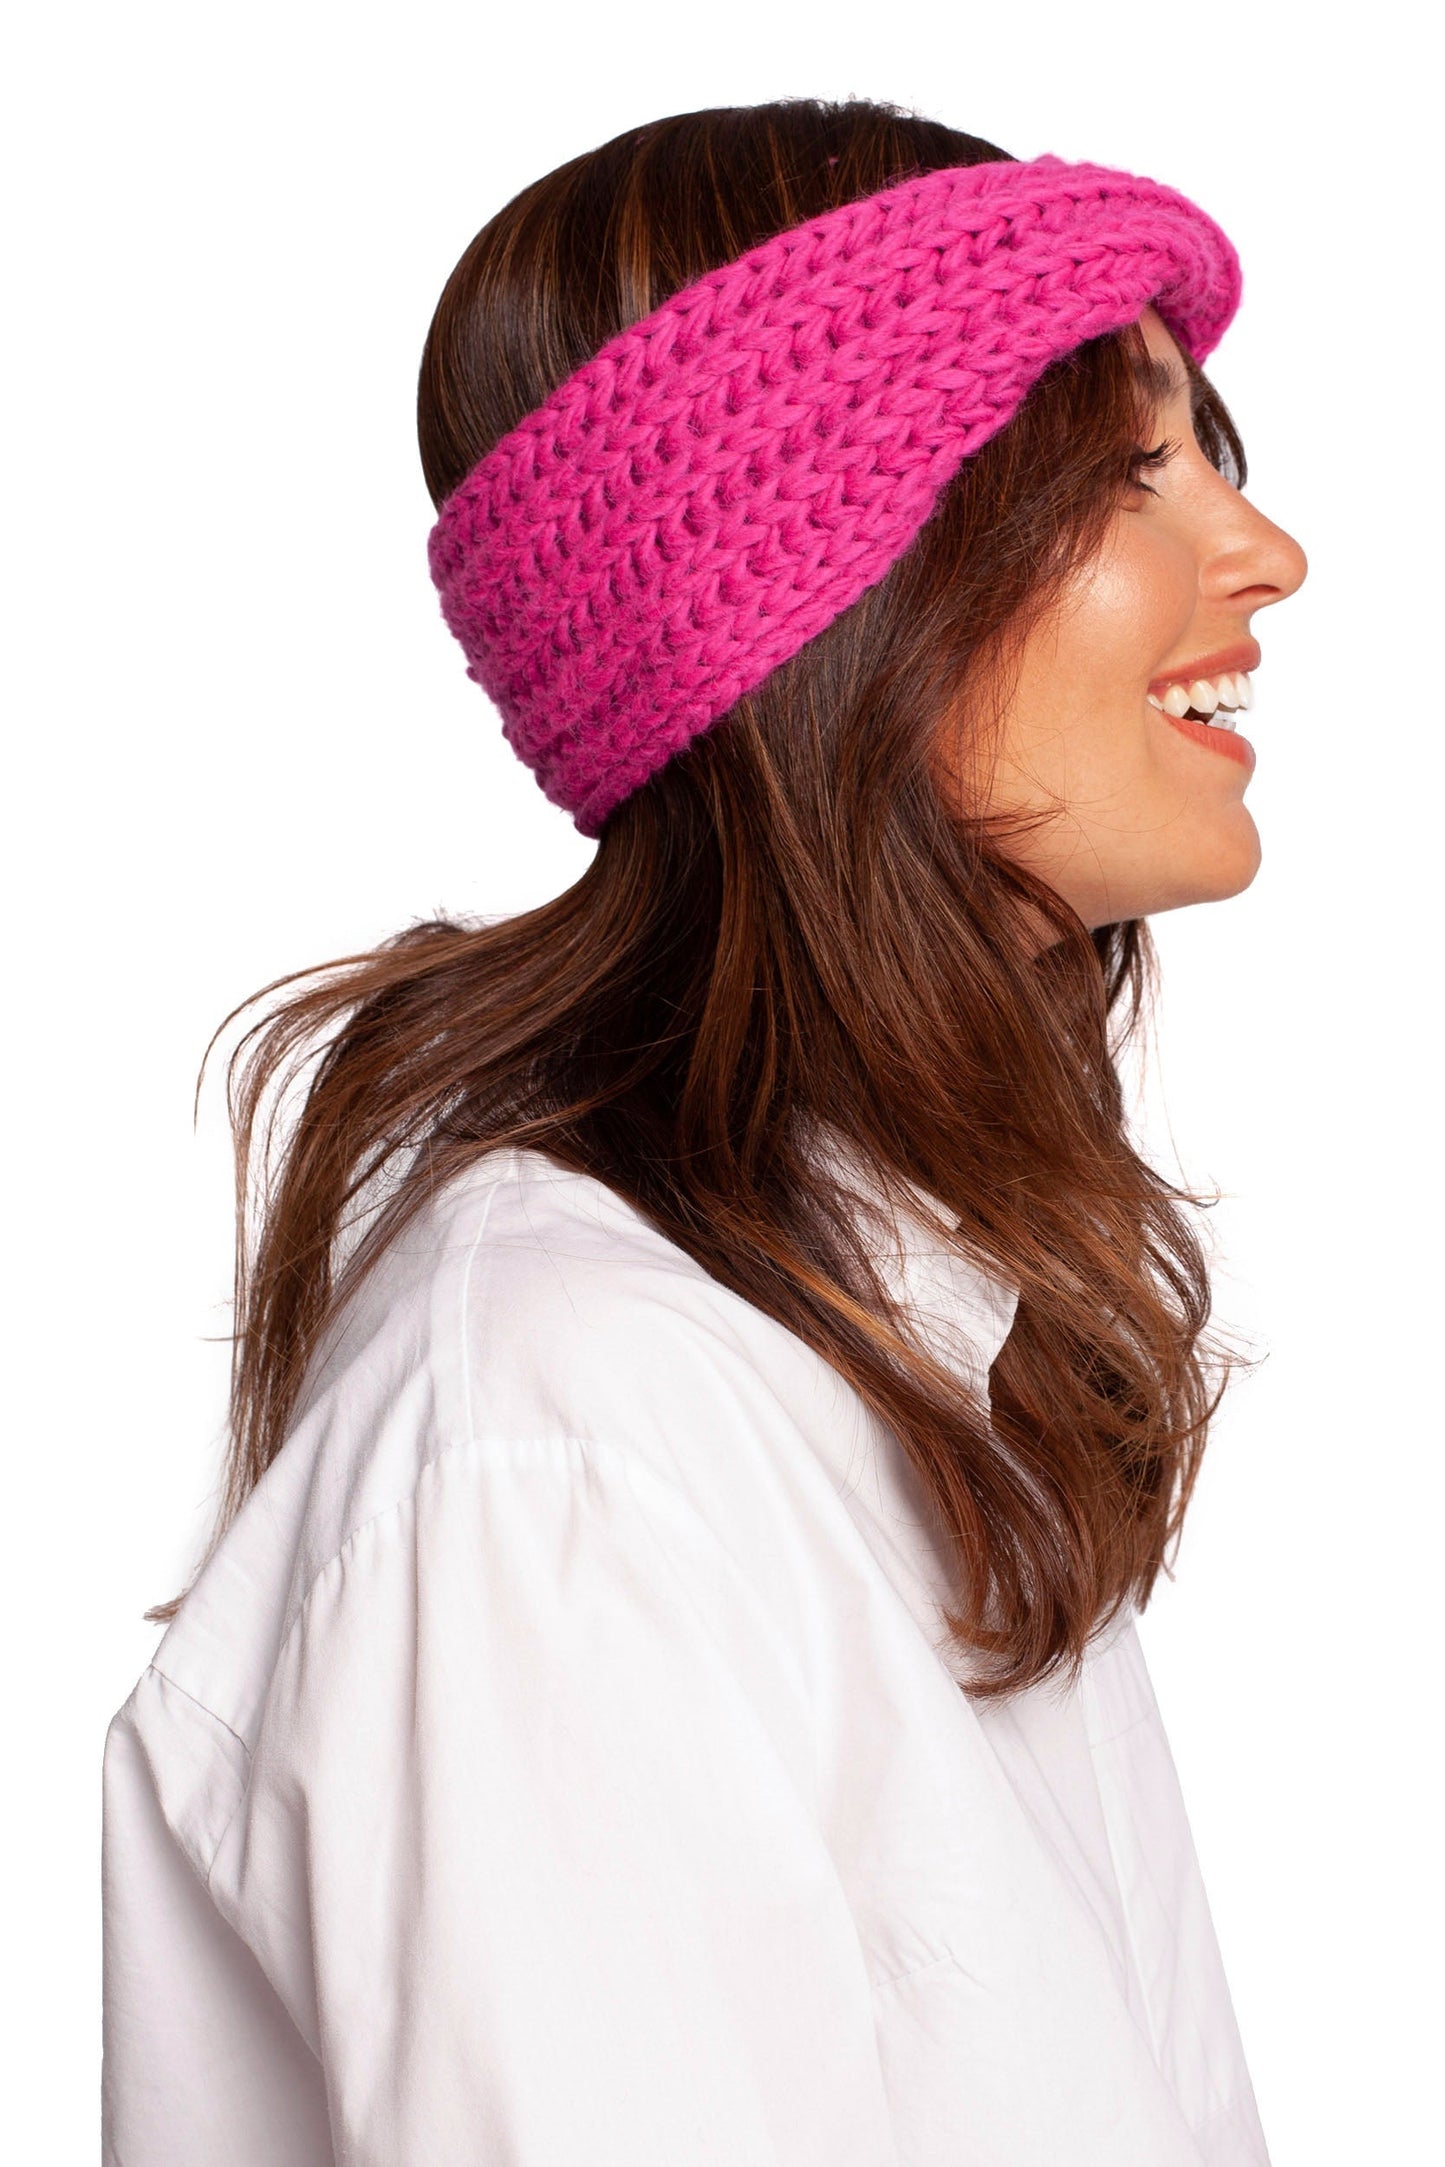 Band model 171240 Elsy Style Caps & Hats for Women